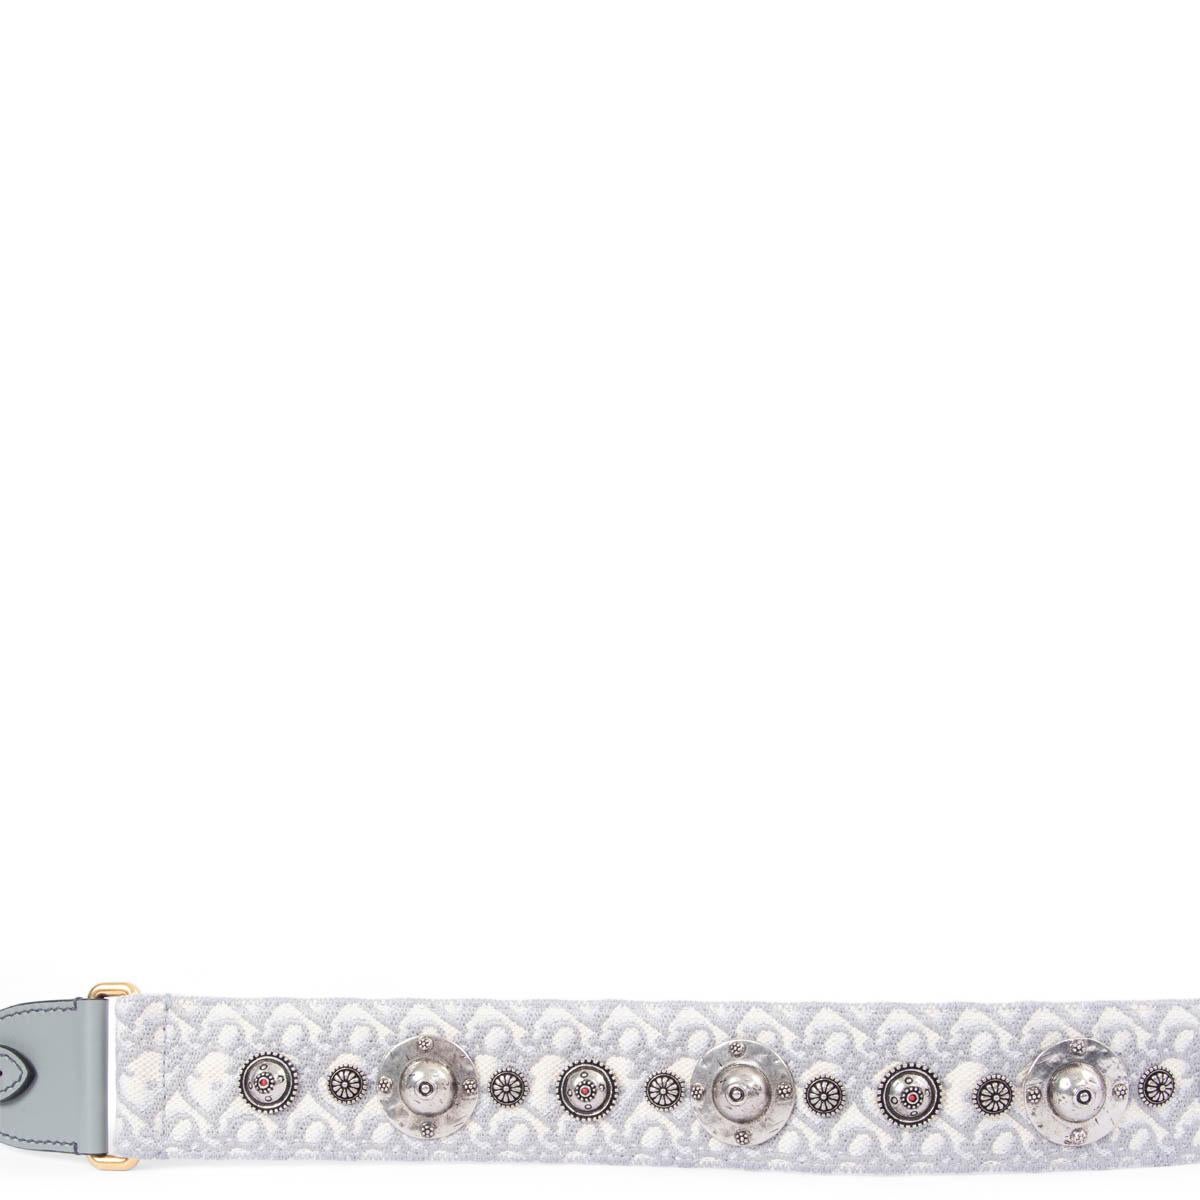 100% authentic Christian Dior silver-tone studded metal emblems Dior Oblique belt strap in light grey and ecru canvas featuring gold-tone clasps with light grey leather trimming. Has been carried and is in excellent condition.